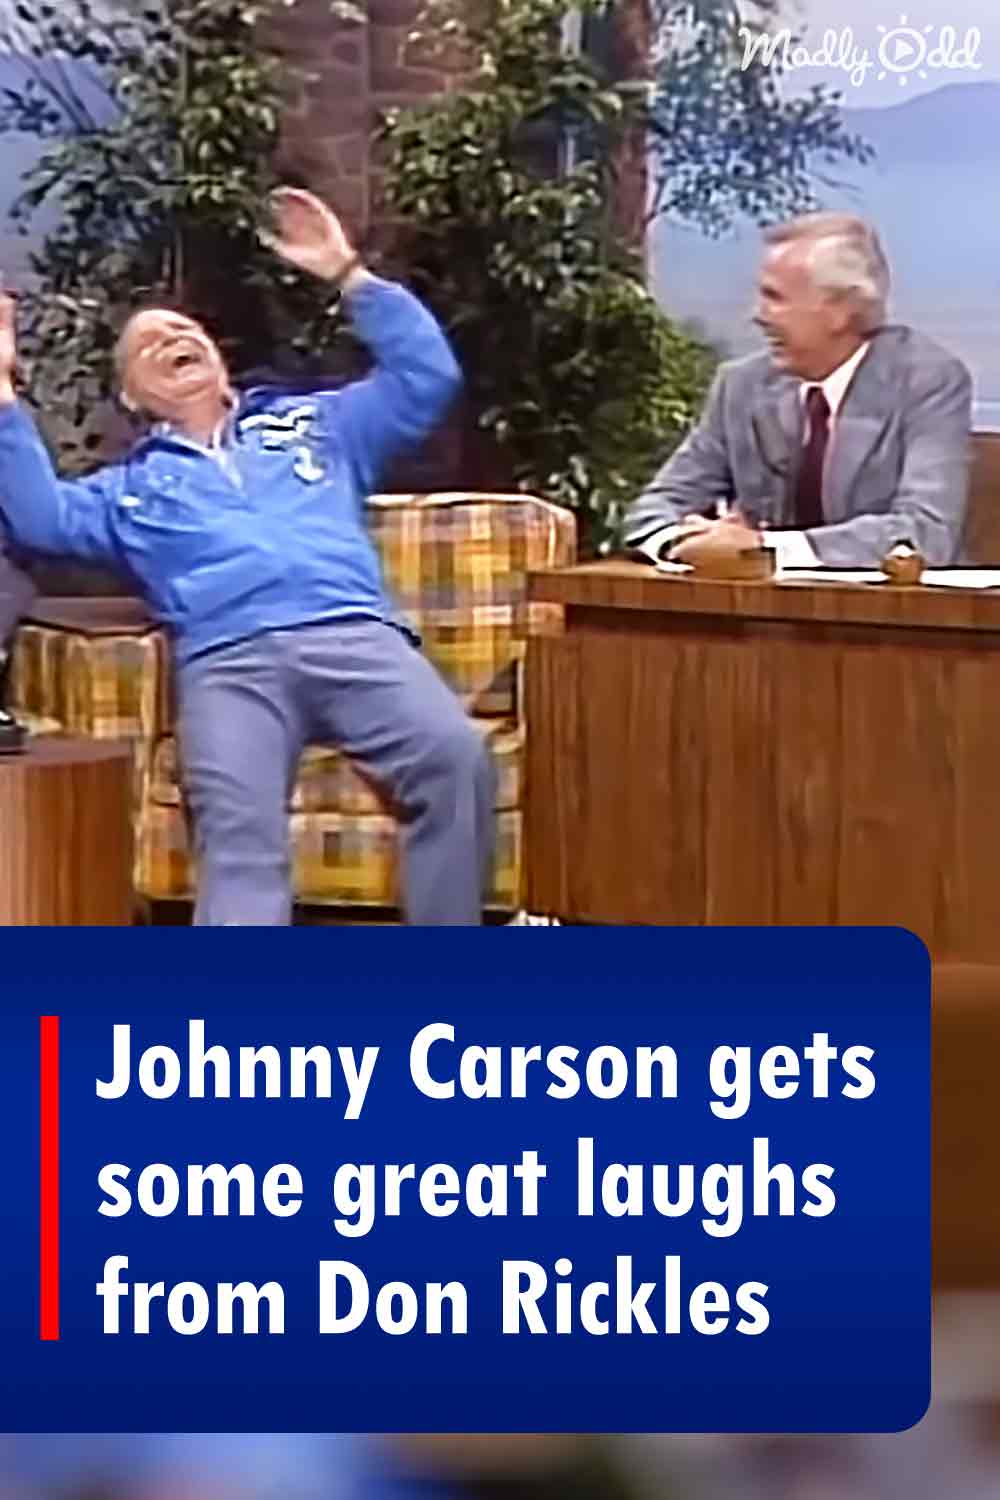 Johnny Carson gets some great laughs from Don Rickles